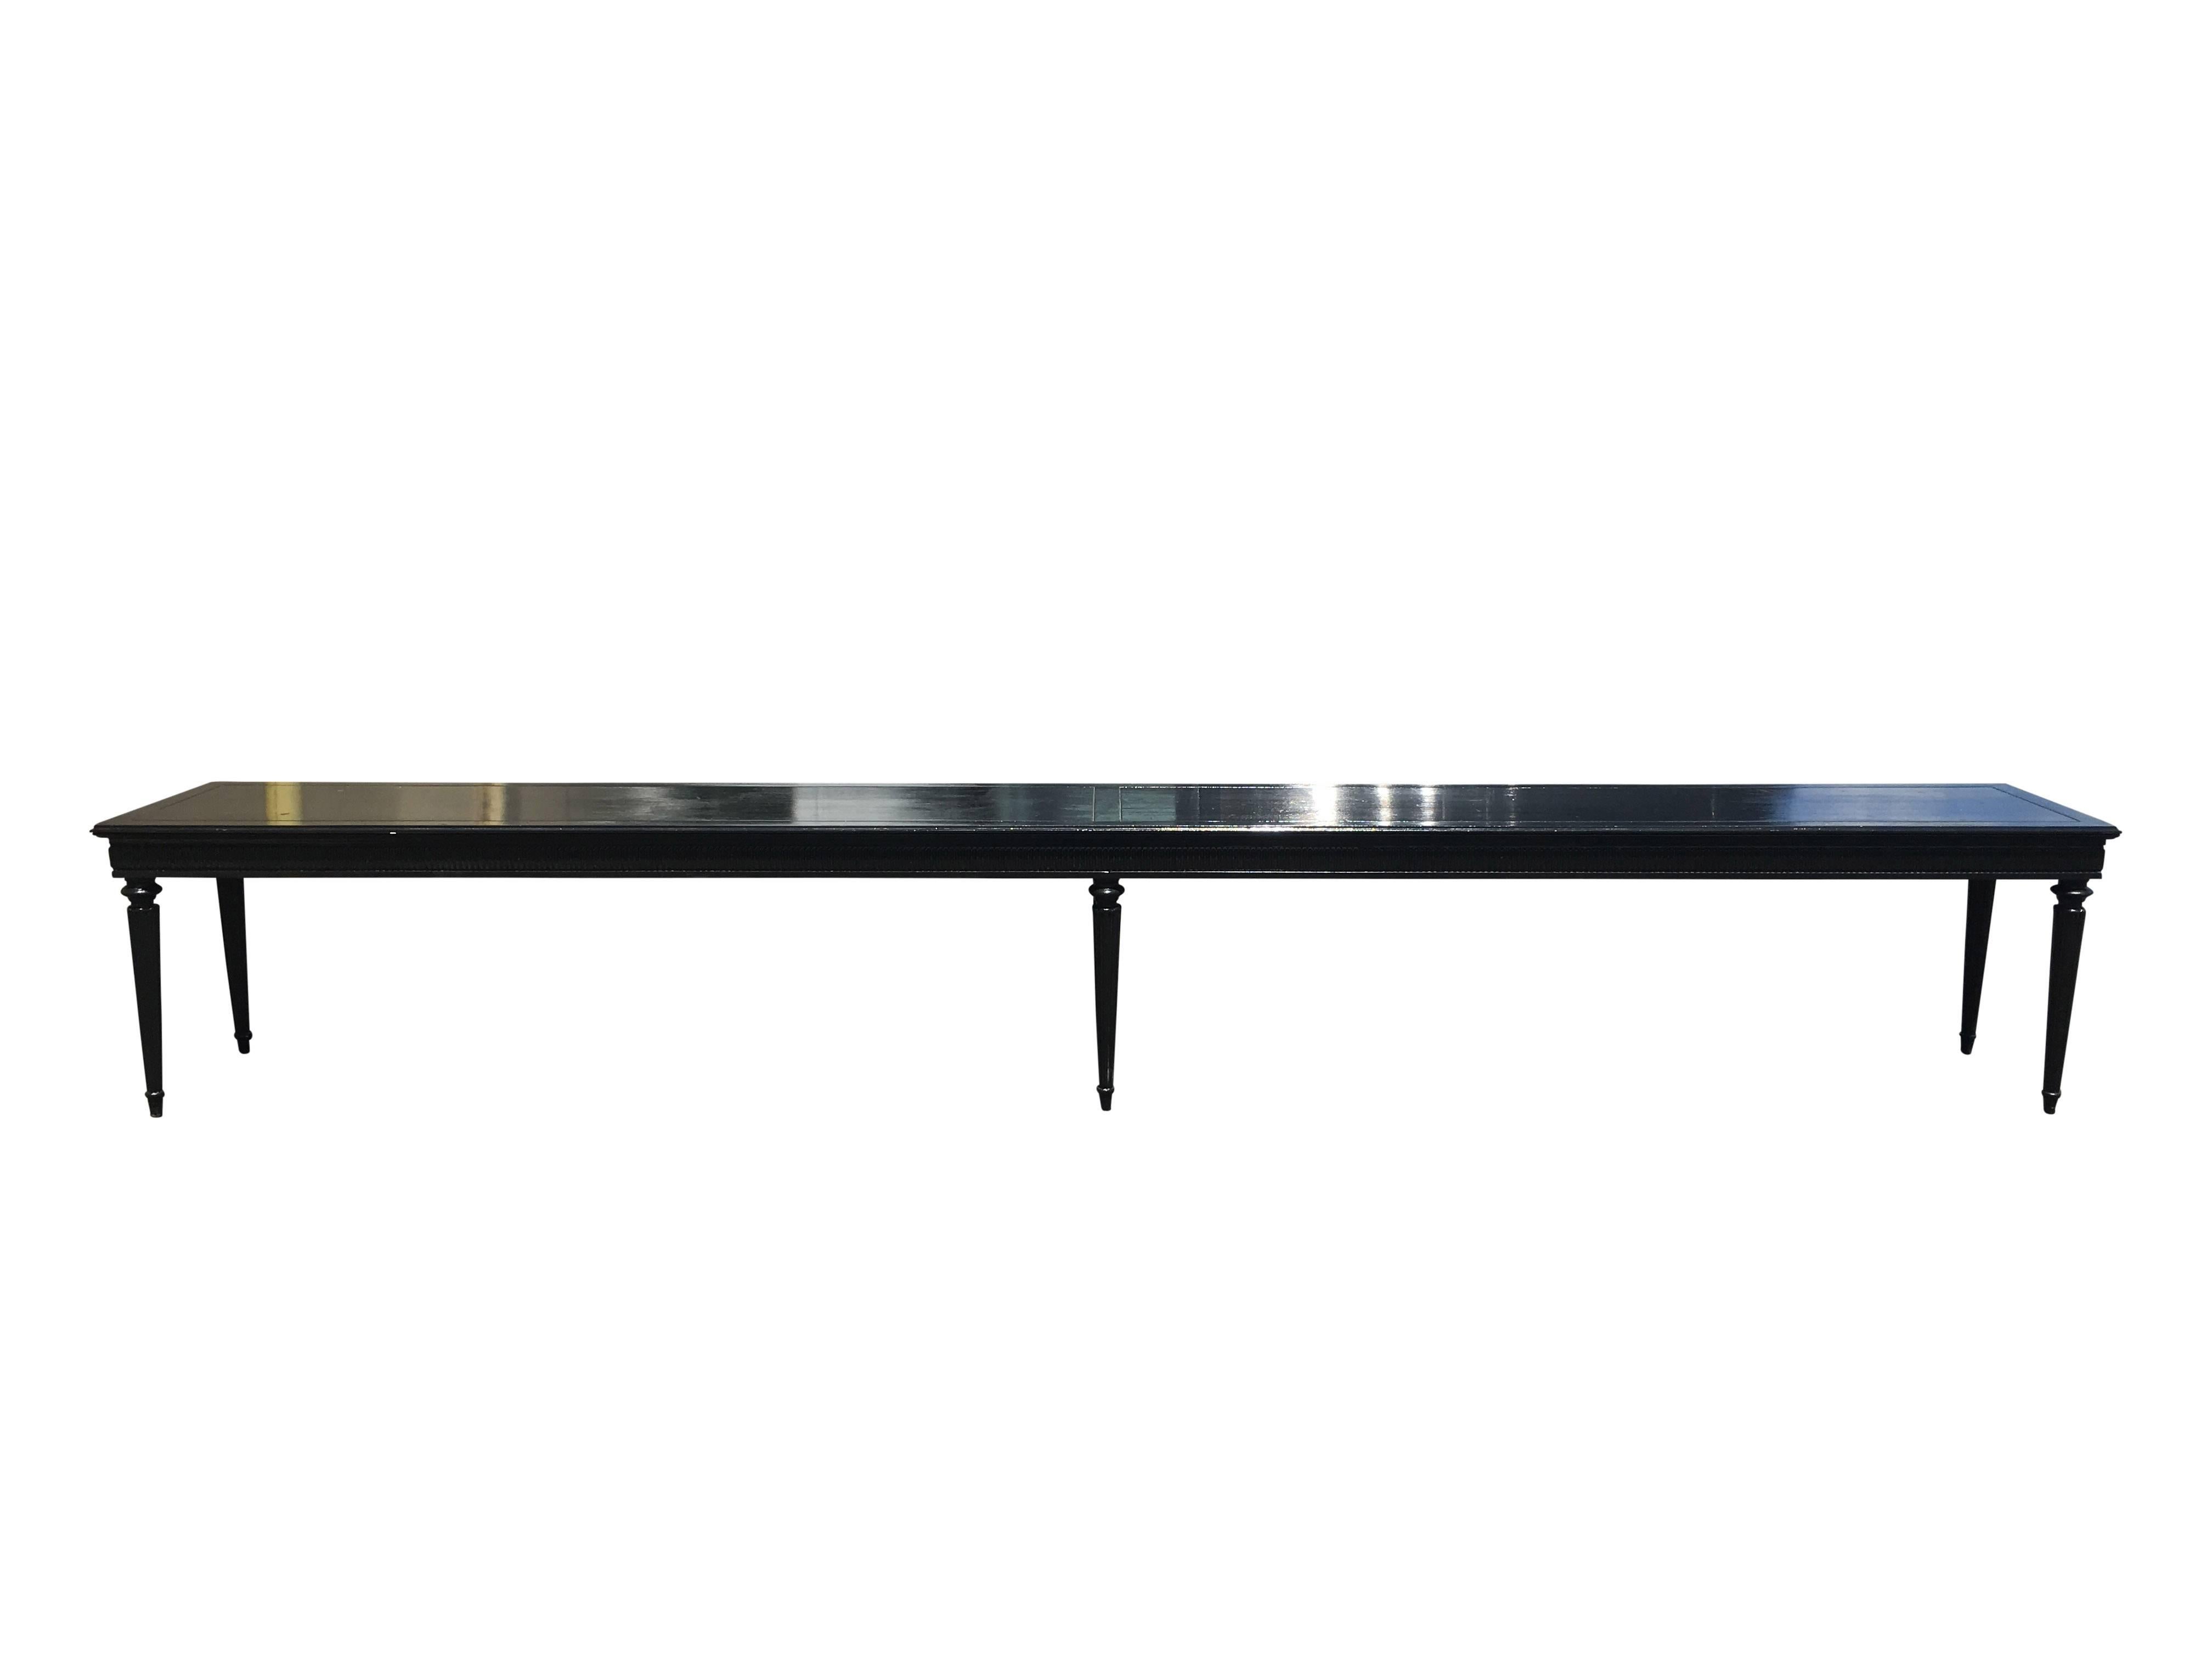 Extra long black lacquered Directoire bench or table. Twelve feet in length.